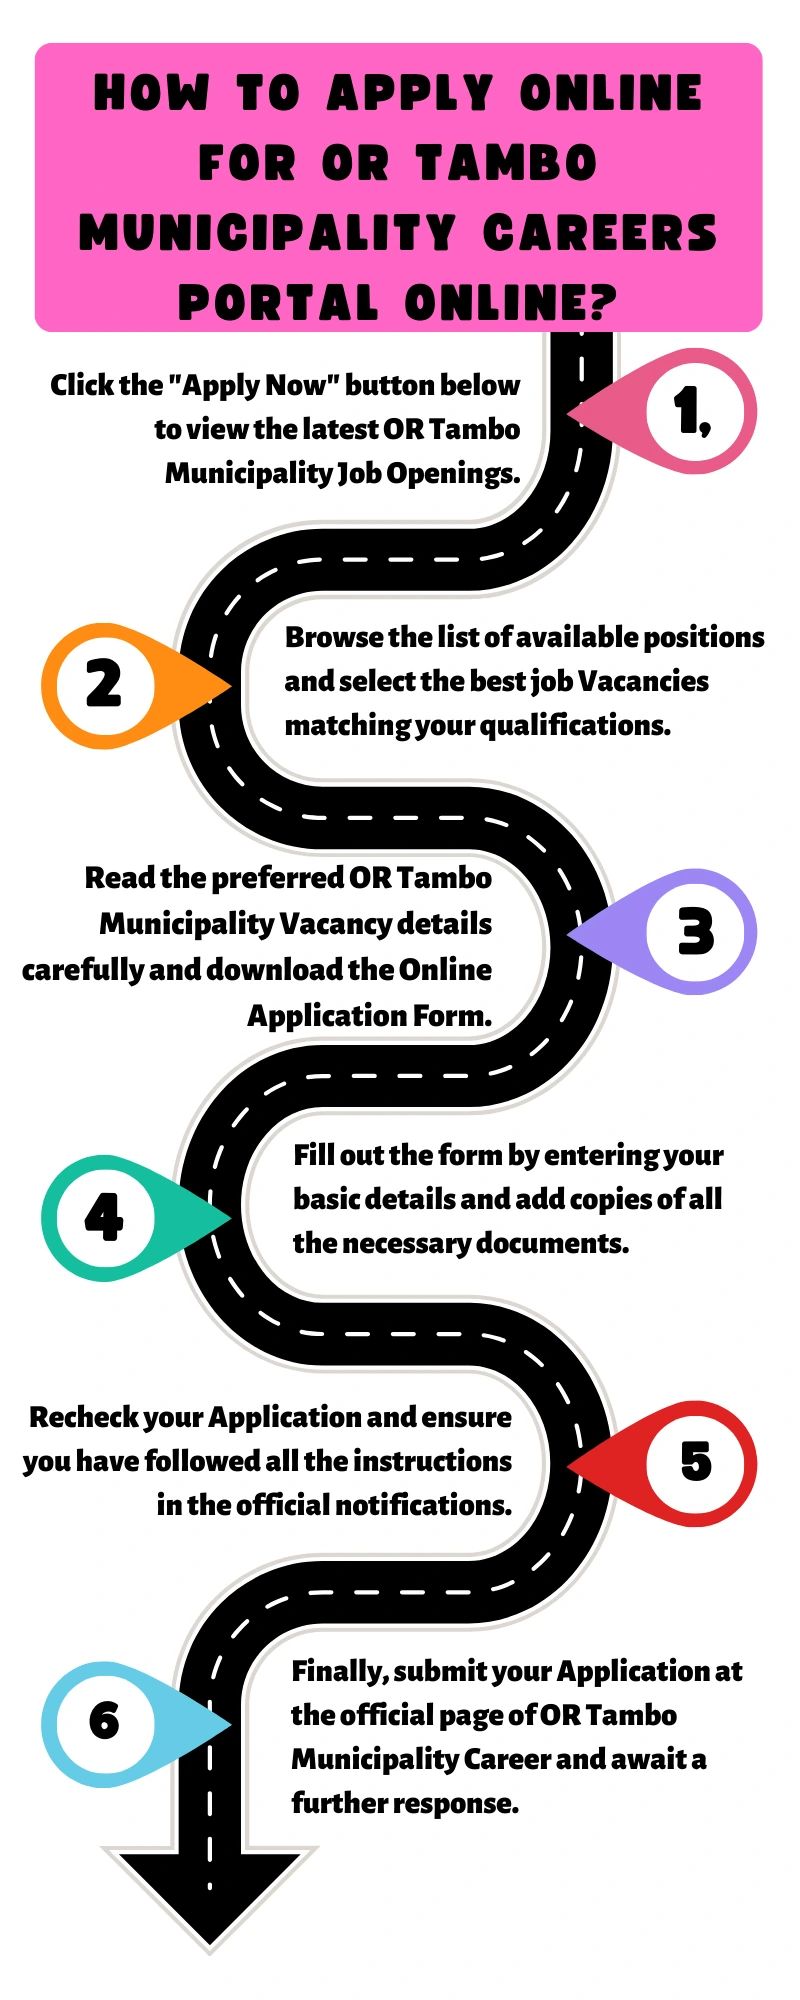 How to Apply online for OR Tambo Municipality Careers Portal Online?